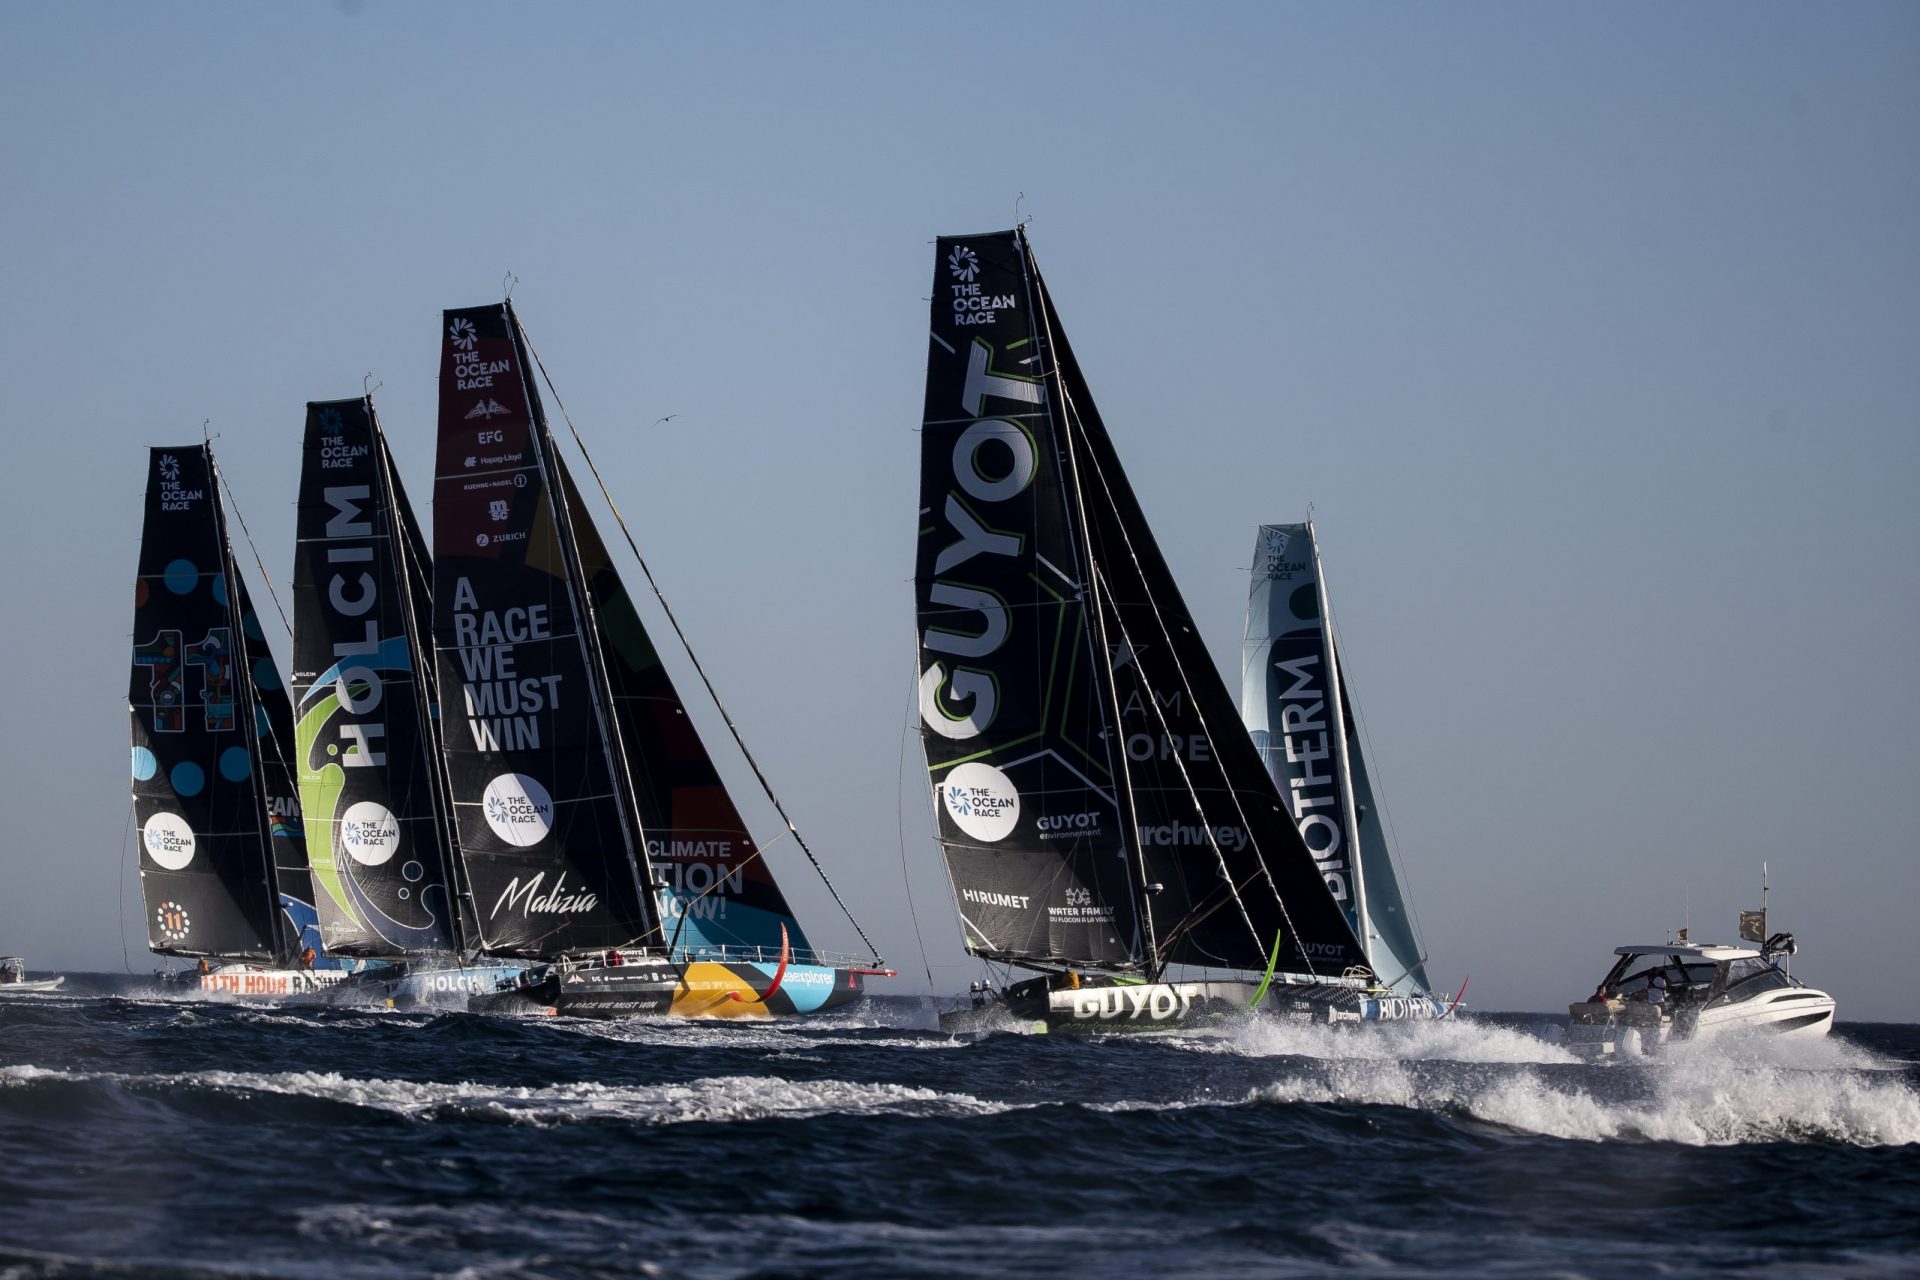 <p>The pods of orcas off the coast of Portugal and Spain have become the new pirates of the Strait of Gibraltar, terrifying sailors all along the coast. During The Ocean Race, the orcas attacked the JAJO sailing team and Mirpuri Trifork Racing!</p>